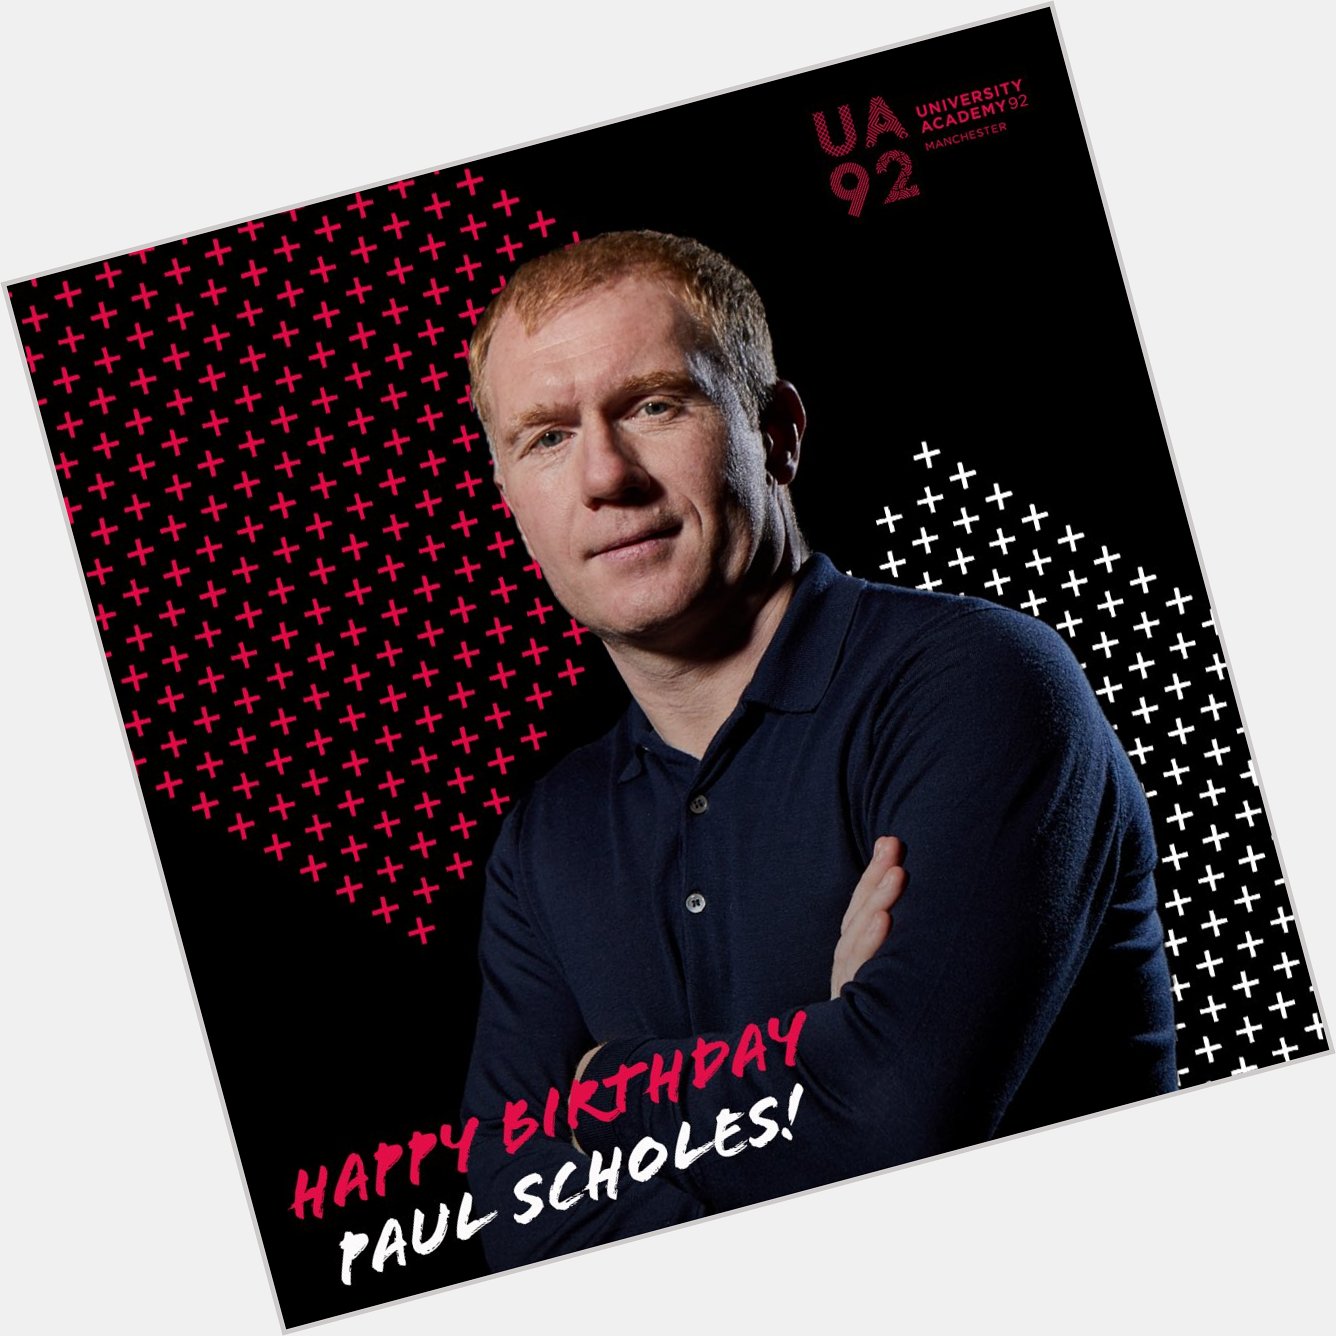 Happy birthday to our Co-Founder, Paul Scholes!

Have a great day, Scholsey  